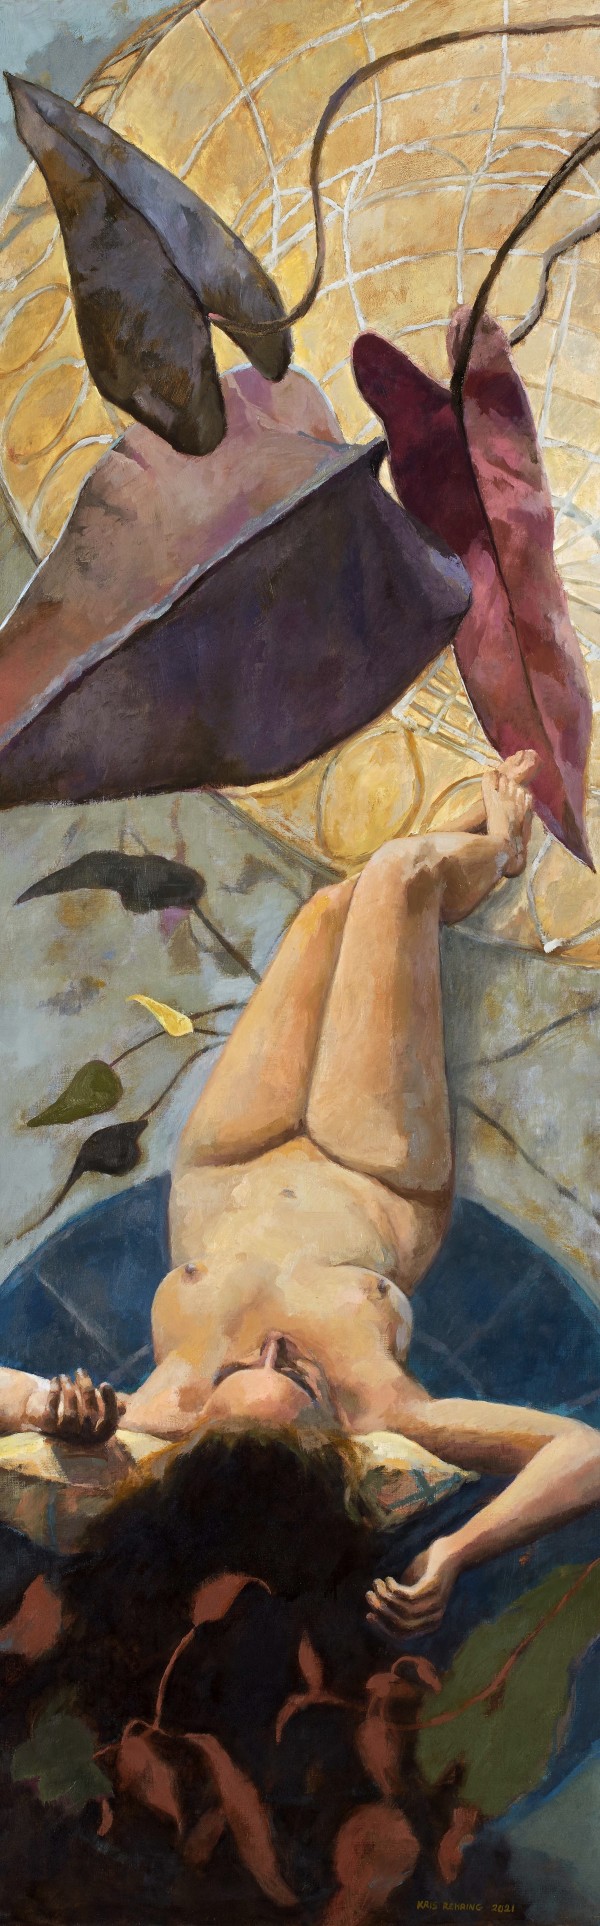 Vining Philodendron and Figure by Kris Rehring